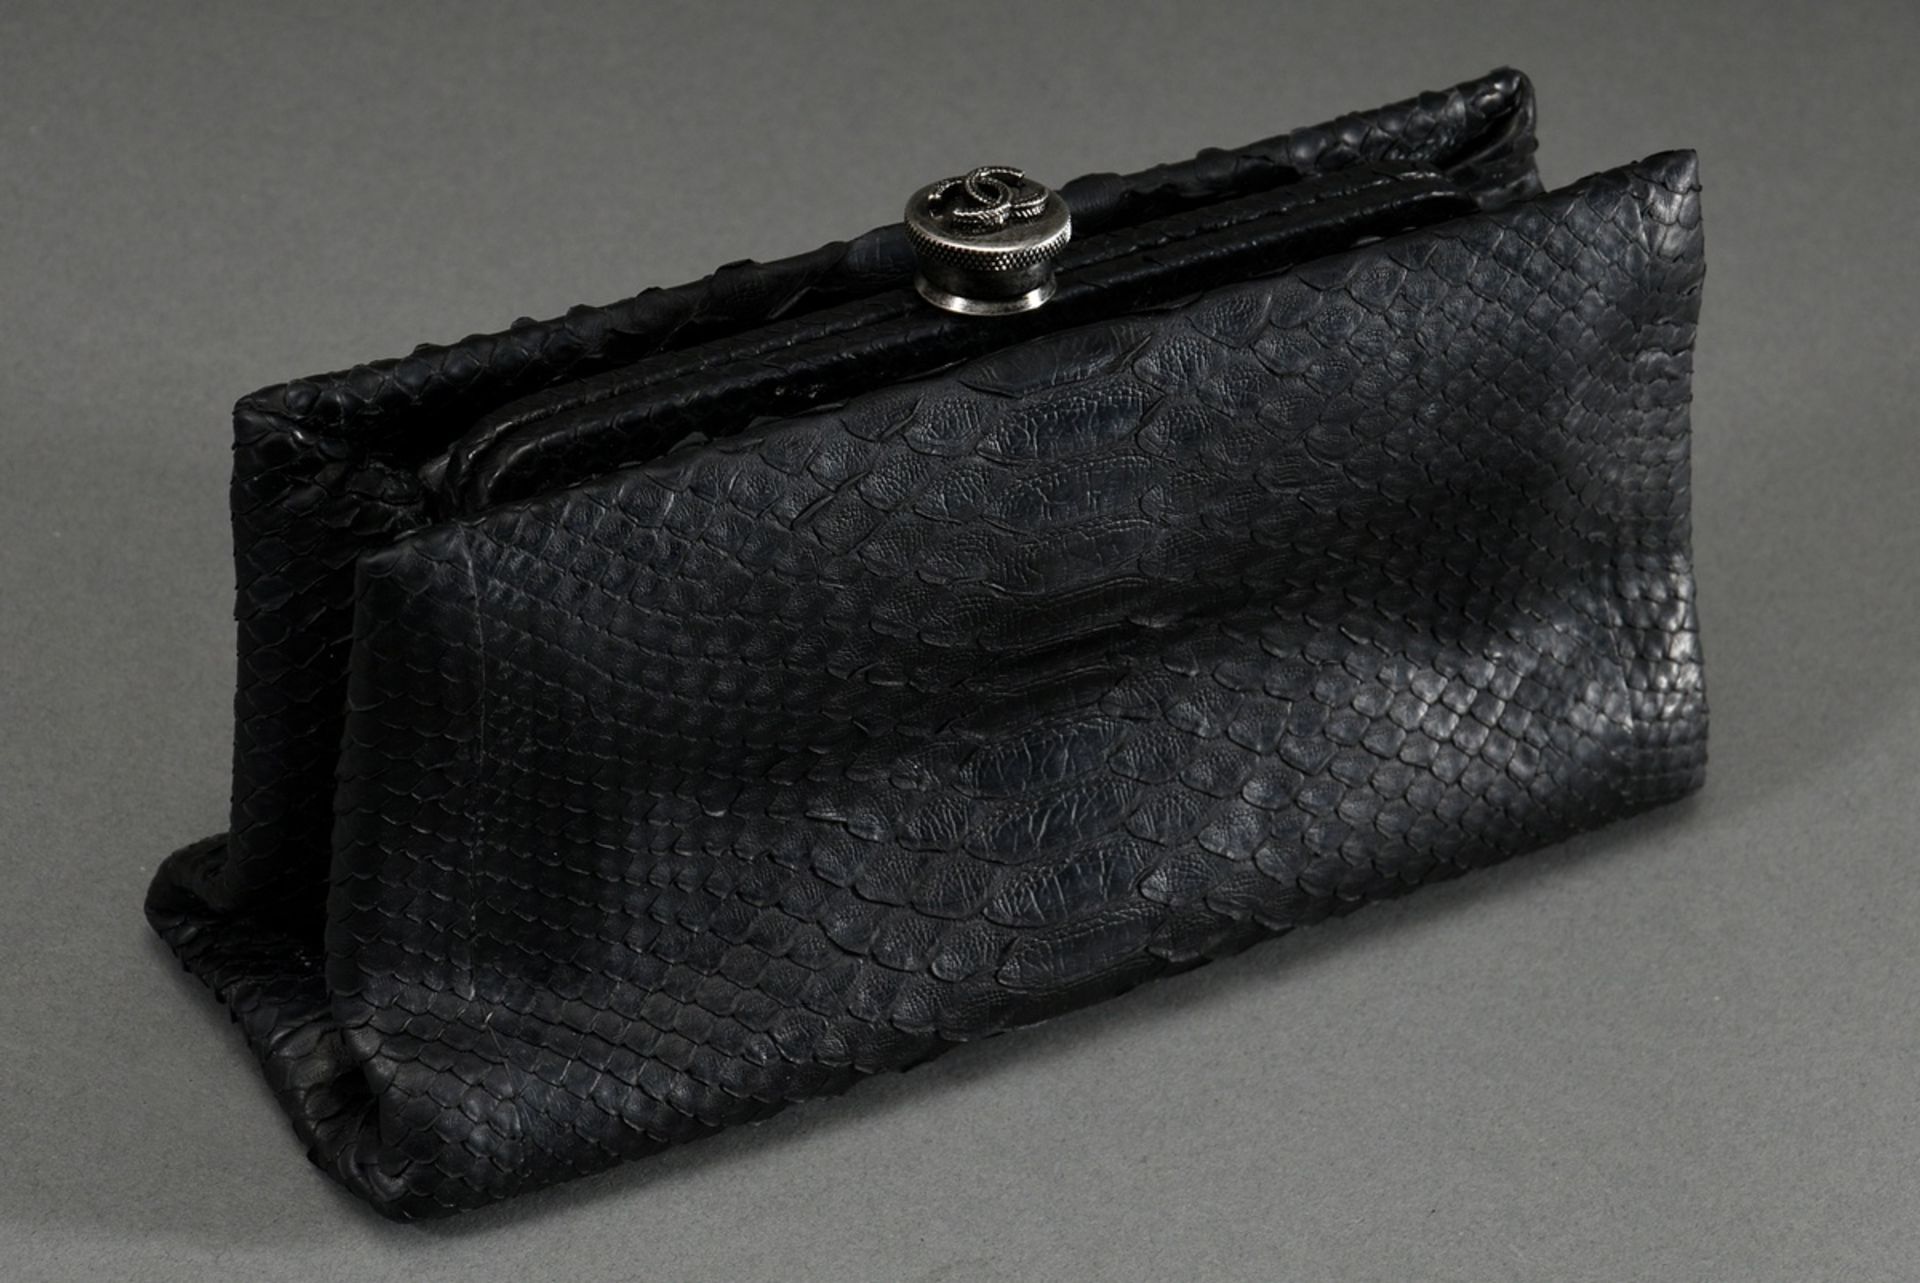 Chanel clutch in black python leather with silver metal logo clasp, black silk lining, Collection 2 - Image 3 of 5